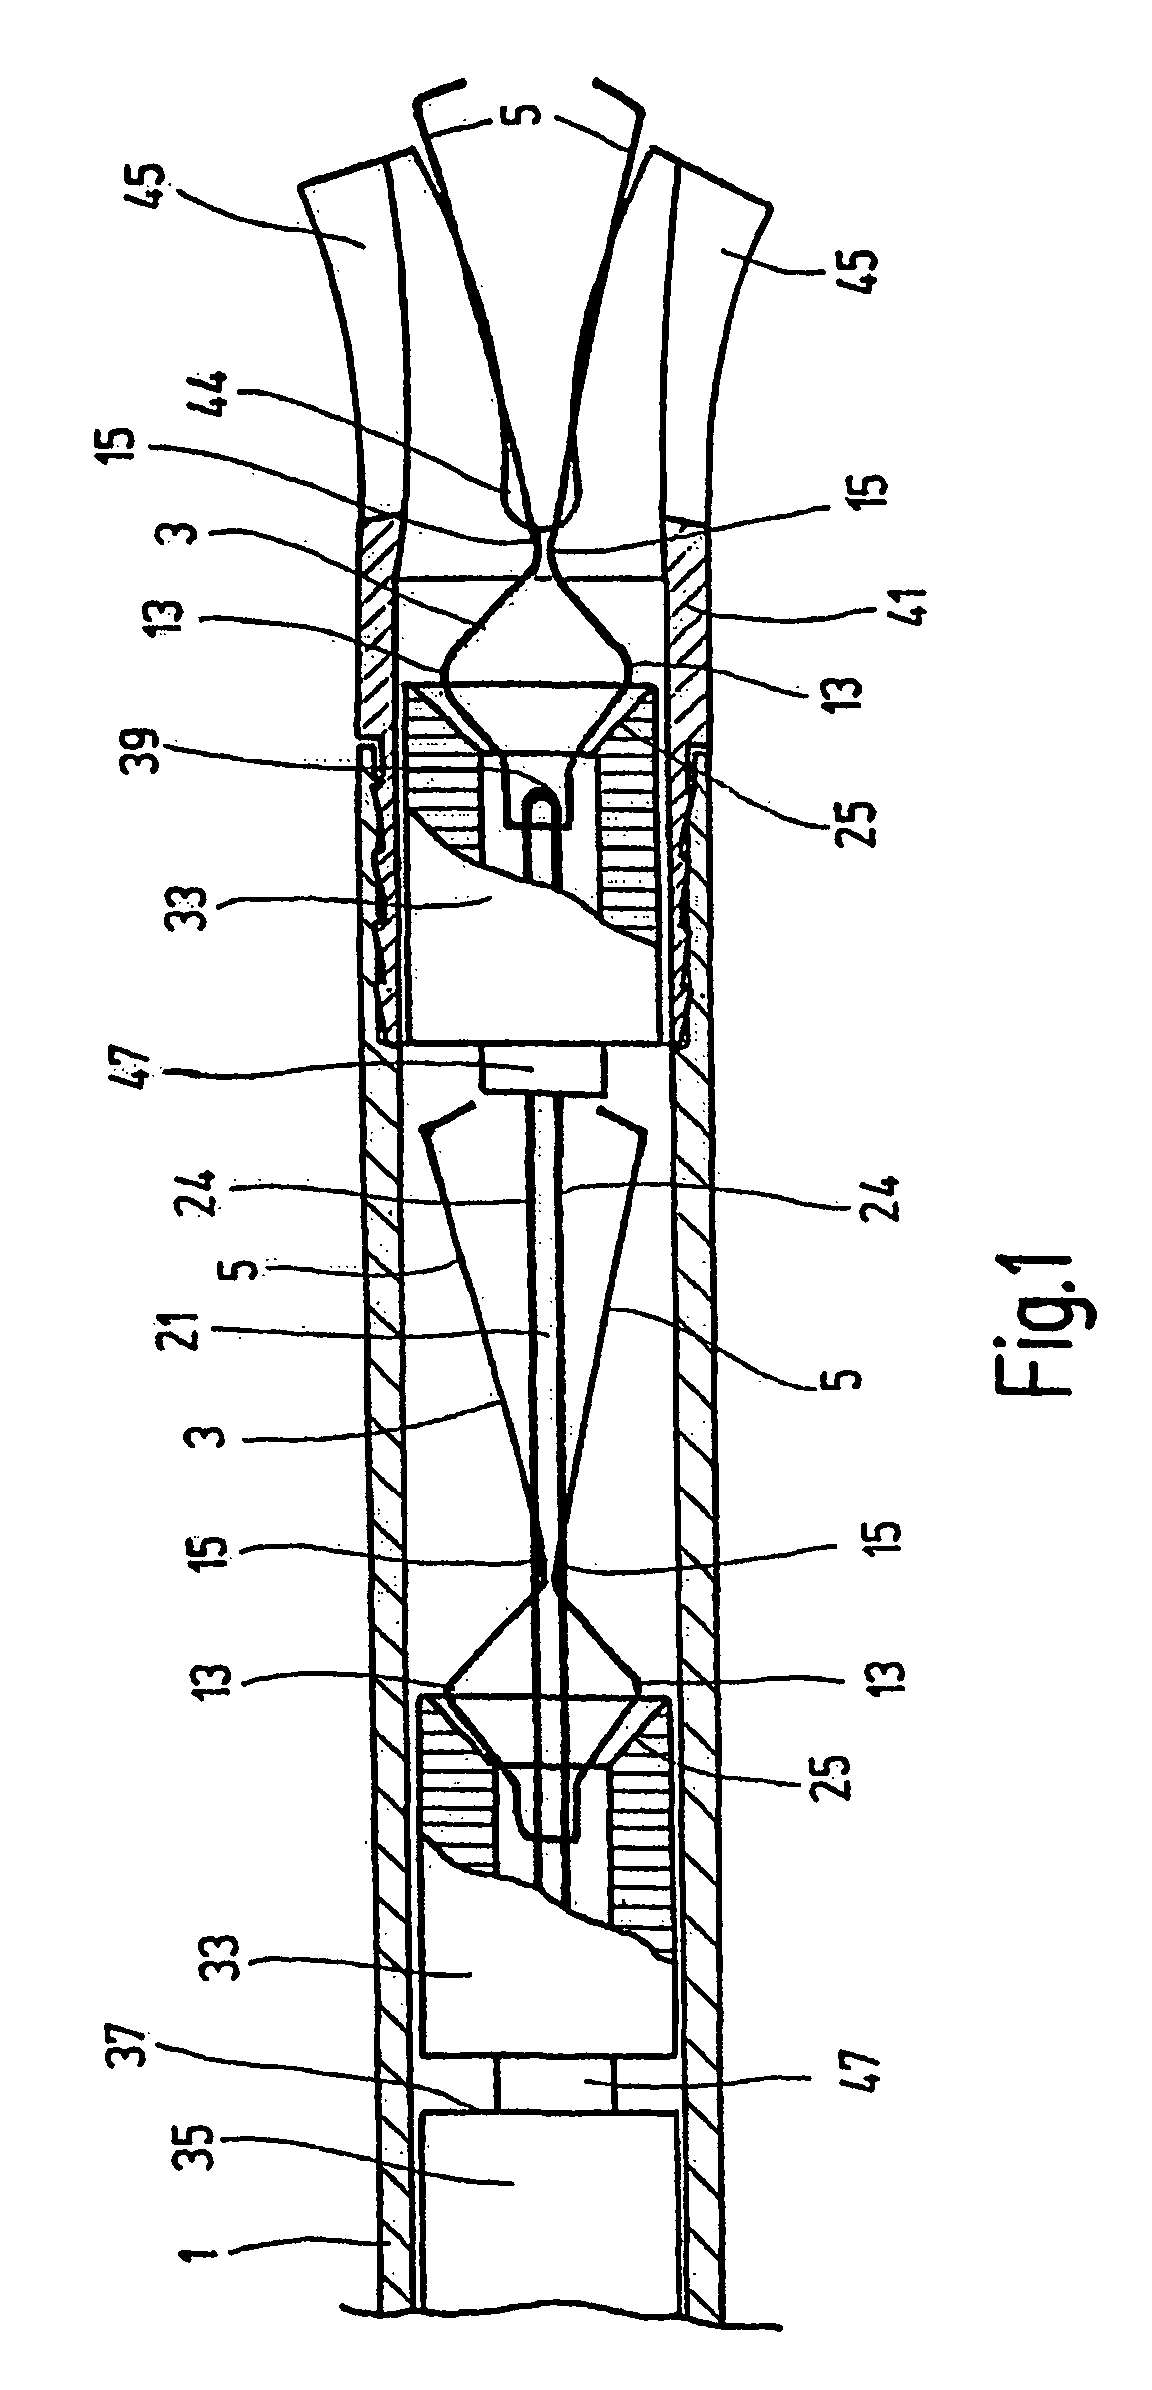 Method and device for the endoscopic application of self-closing medical clips